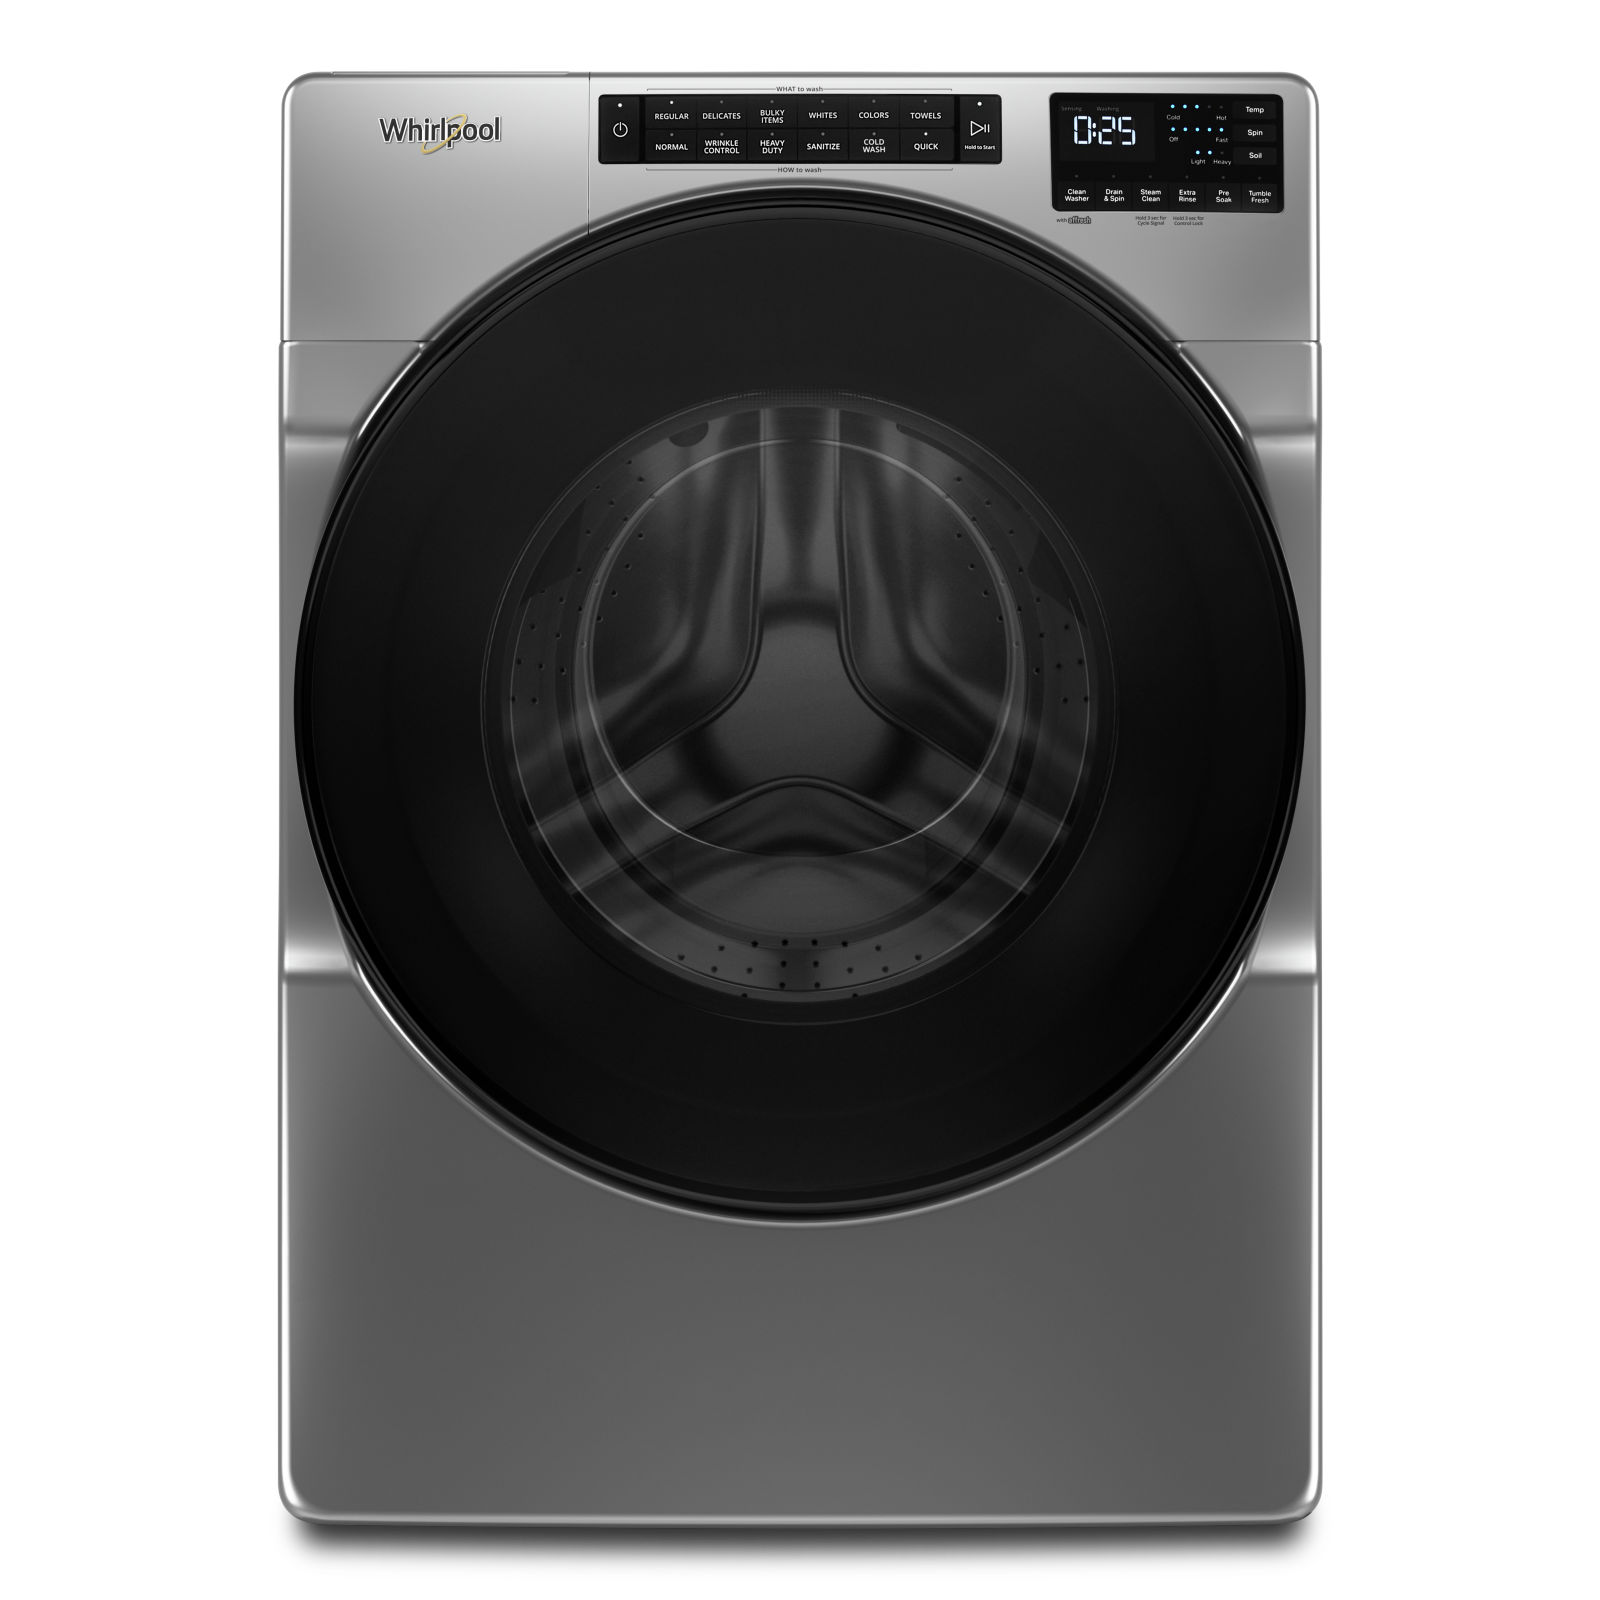 Whirlpool - 5.2 cu. Ft  Front Load Washer in Grey - WFW5605MC